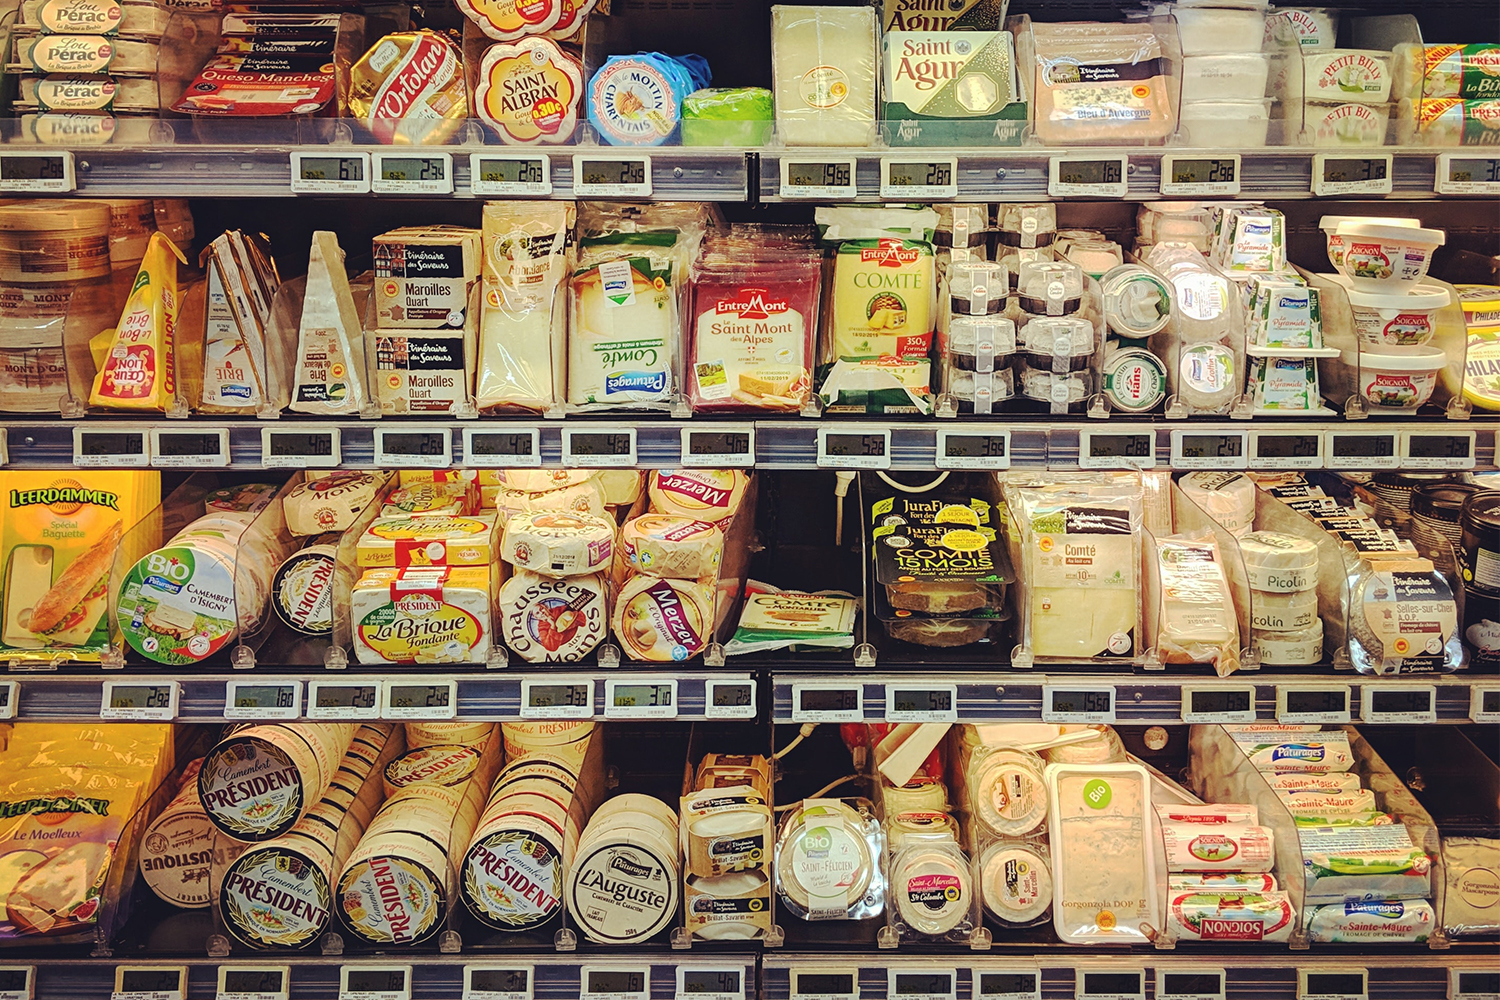 A selection of cheeses at a grocery store on refrigerated shelves